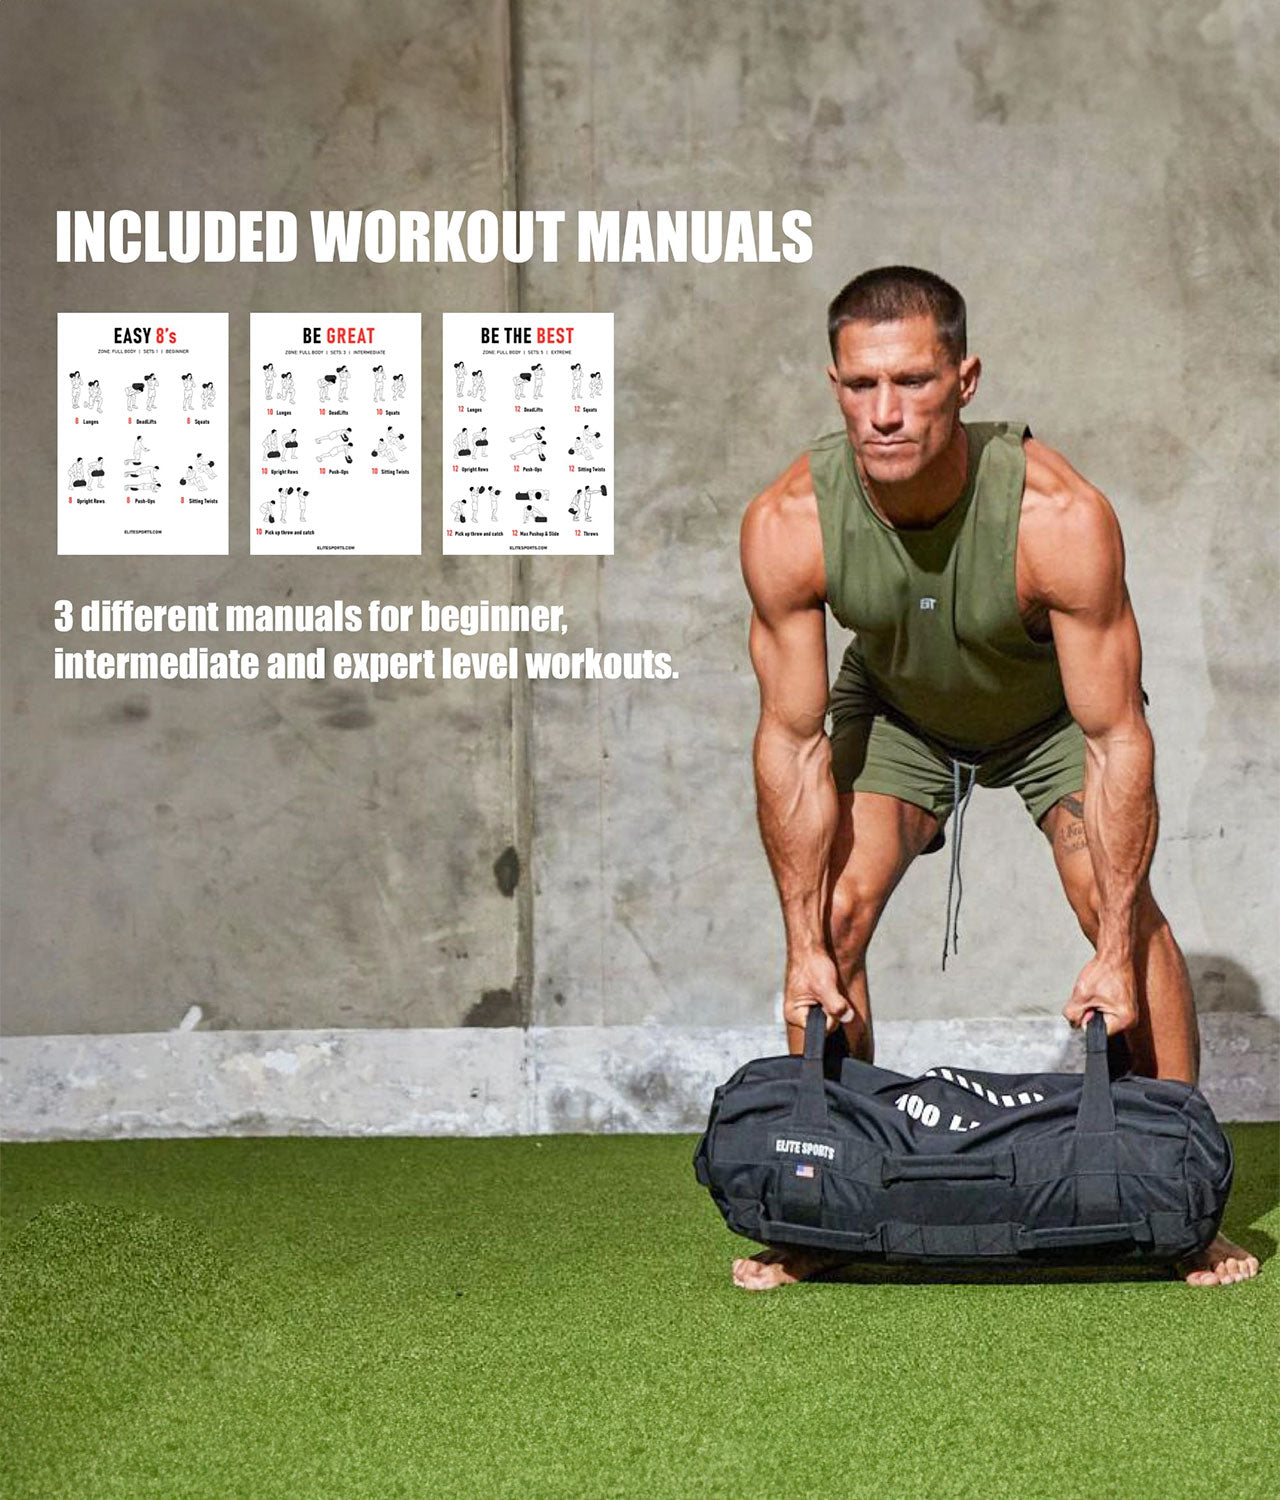 Elite Sports Core Duffel Workout Sandbag 50 lbs Included Workout Manuals